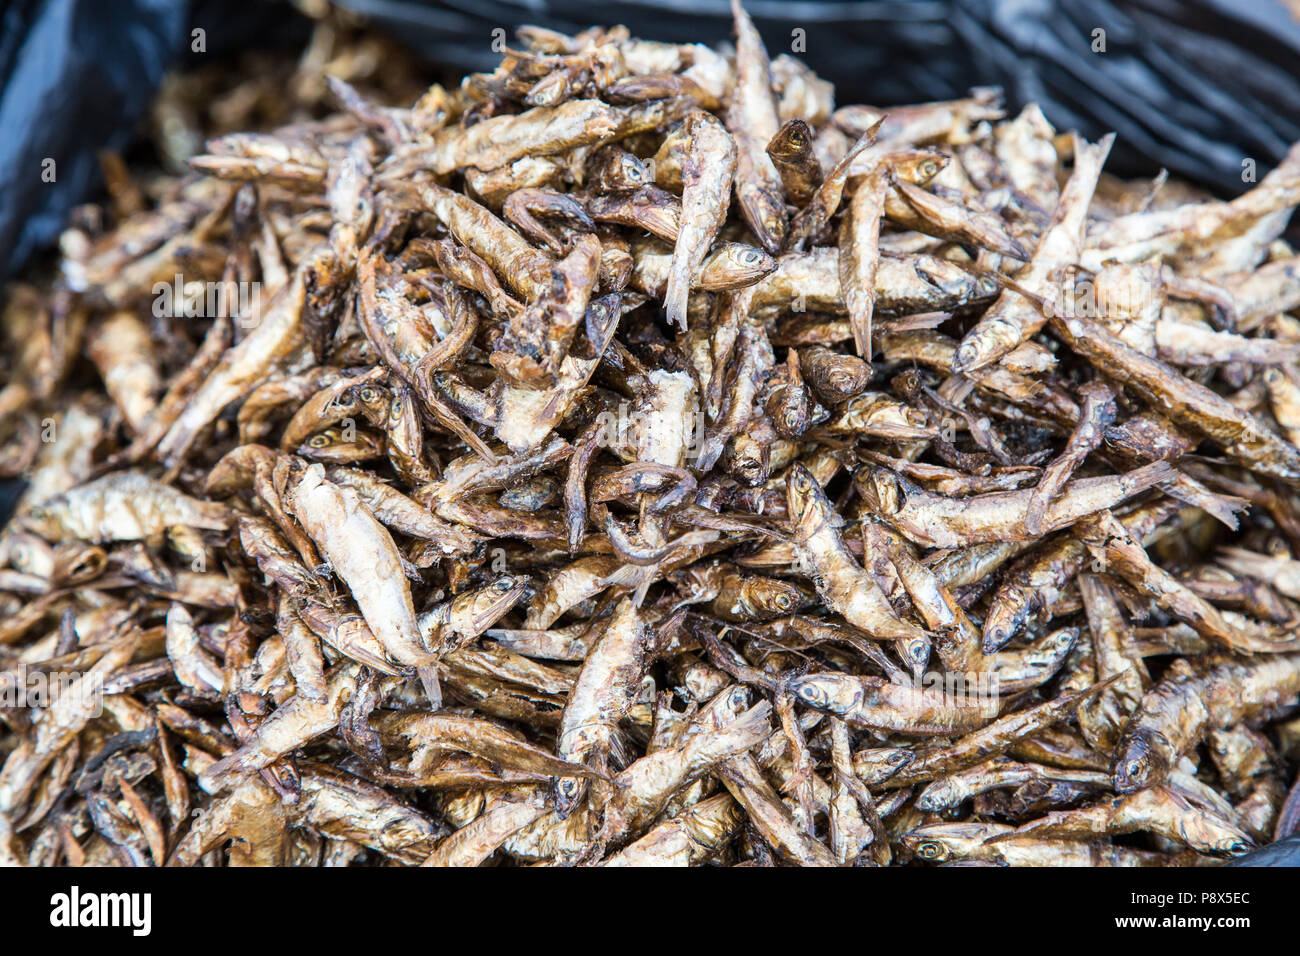 Pile of small fish for sale on market stall, Ghana Stock Photo